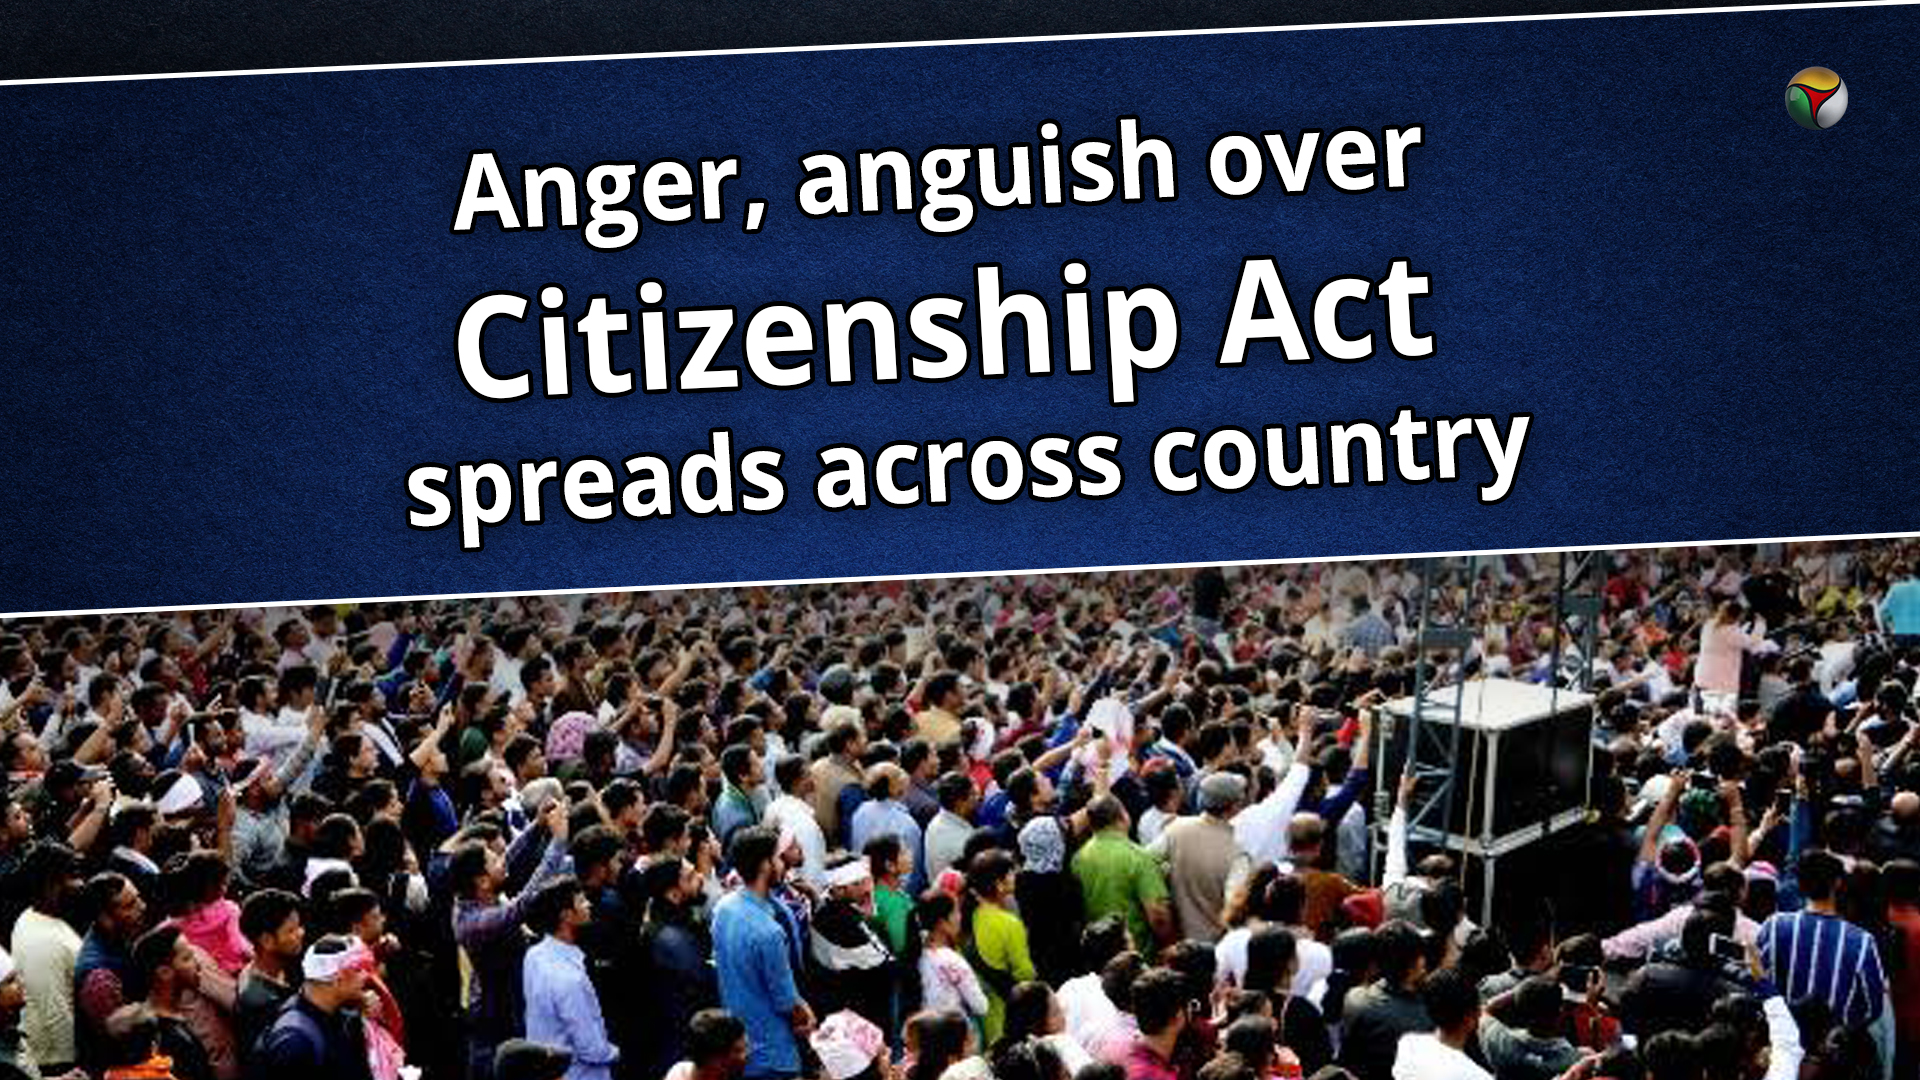 Anger, anguish over Citizenship Act spreads across country